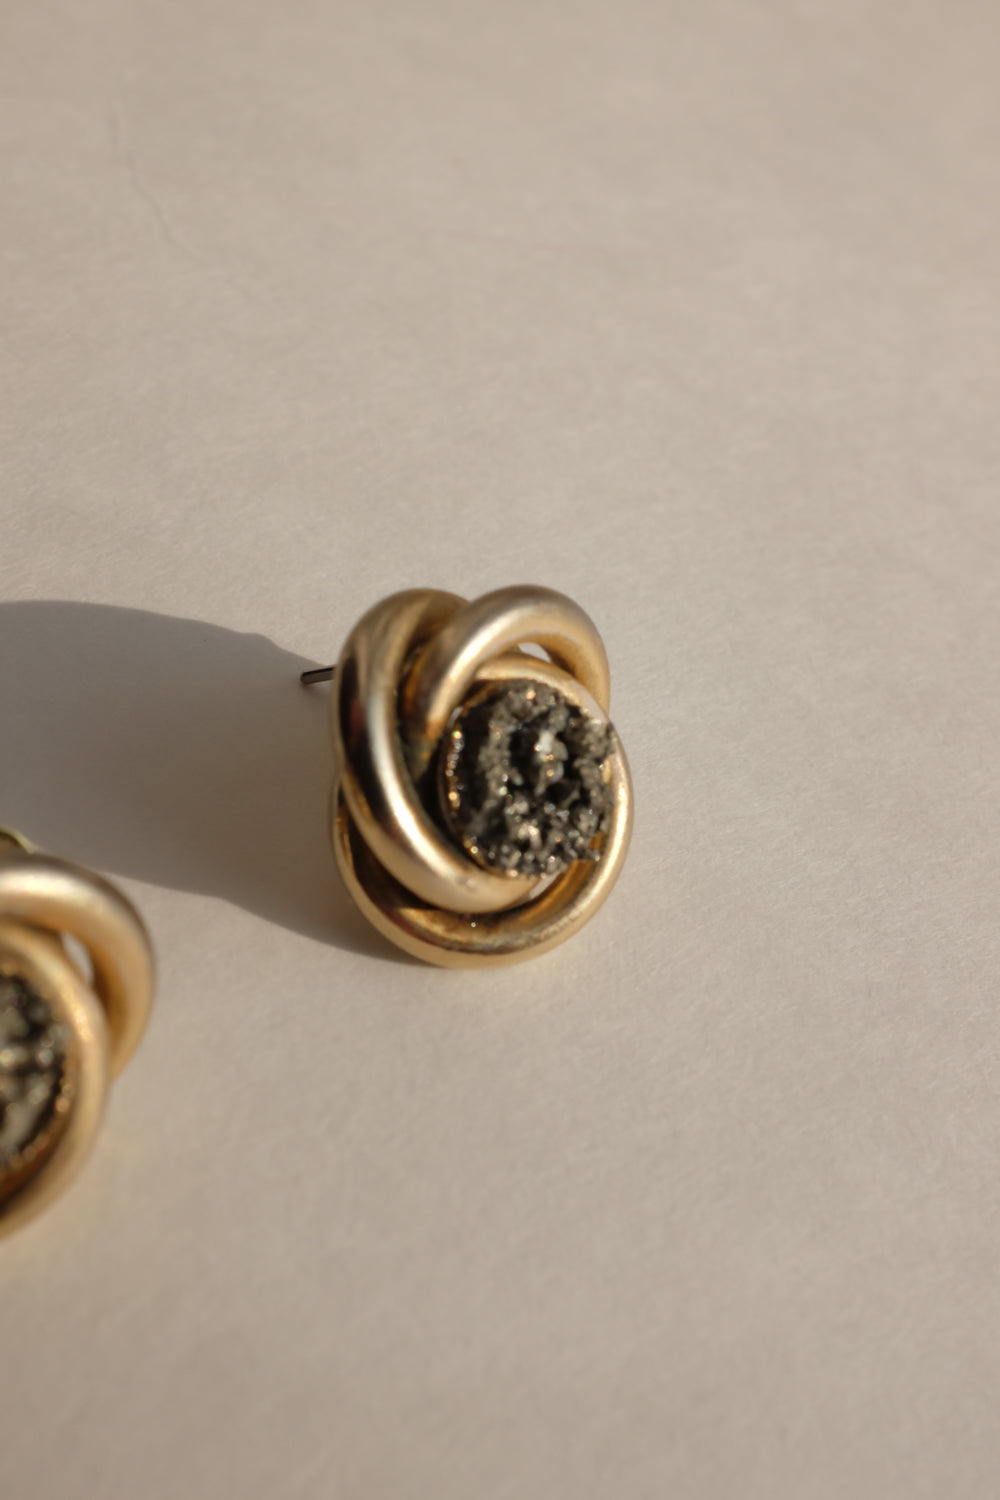 VINTAGE GOLD KNOTTED PYRITE EARRINGS